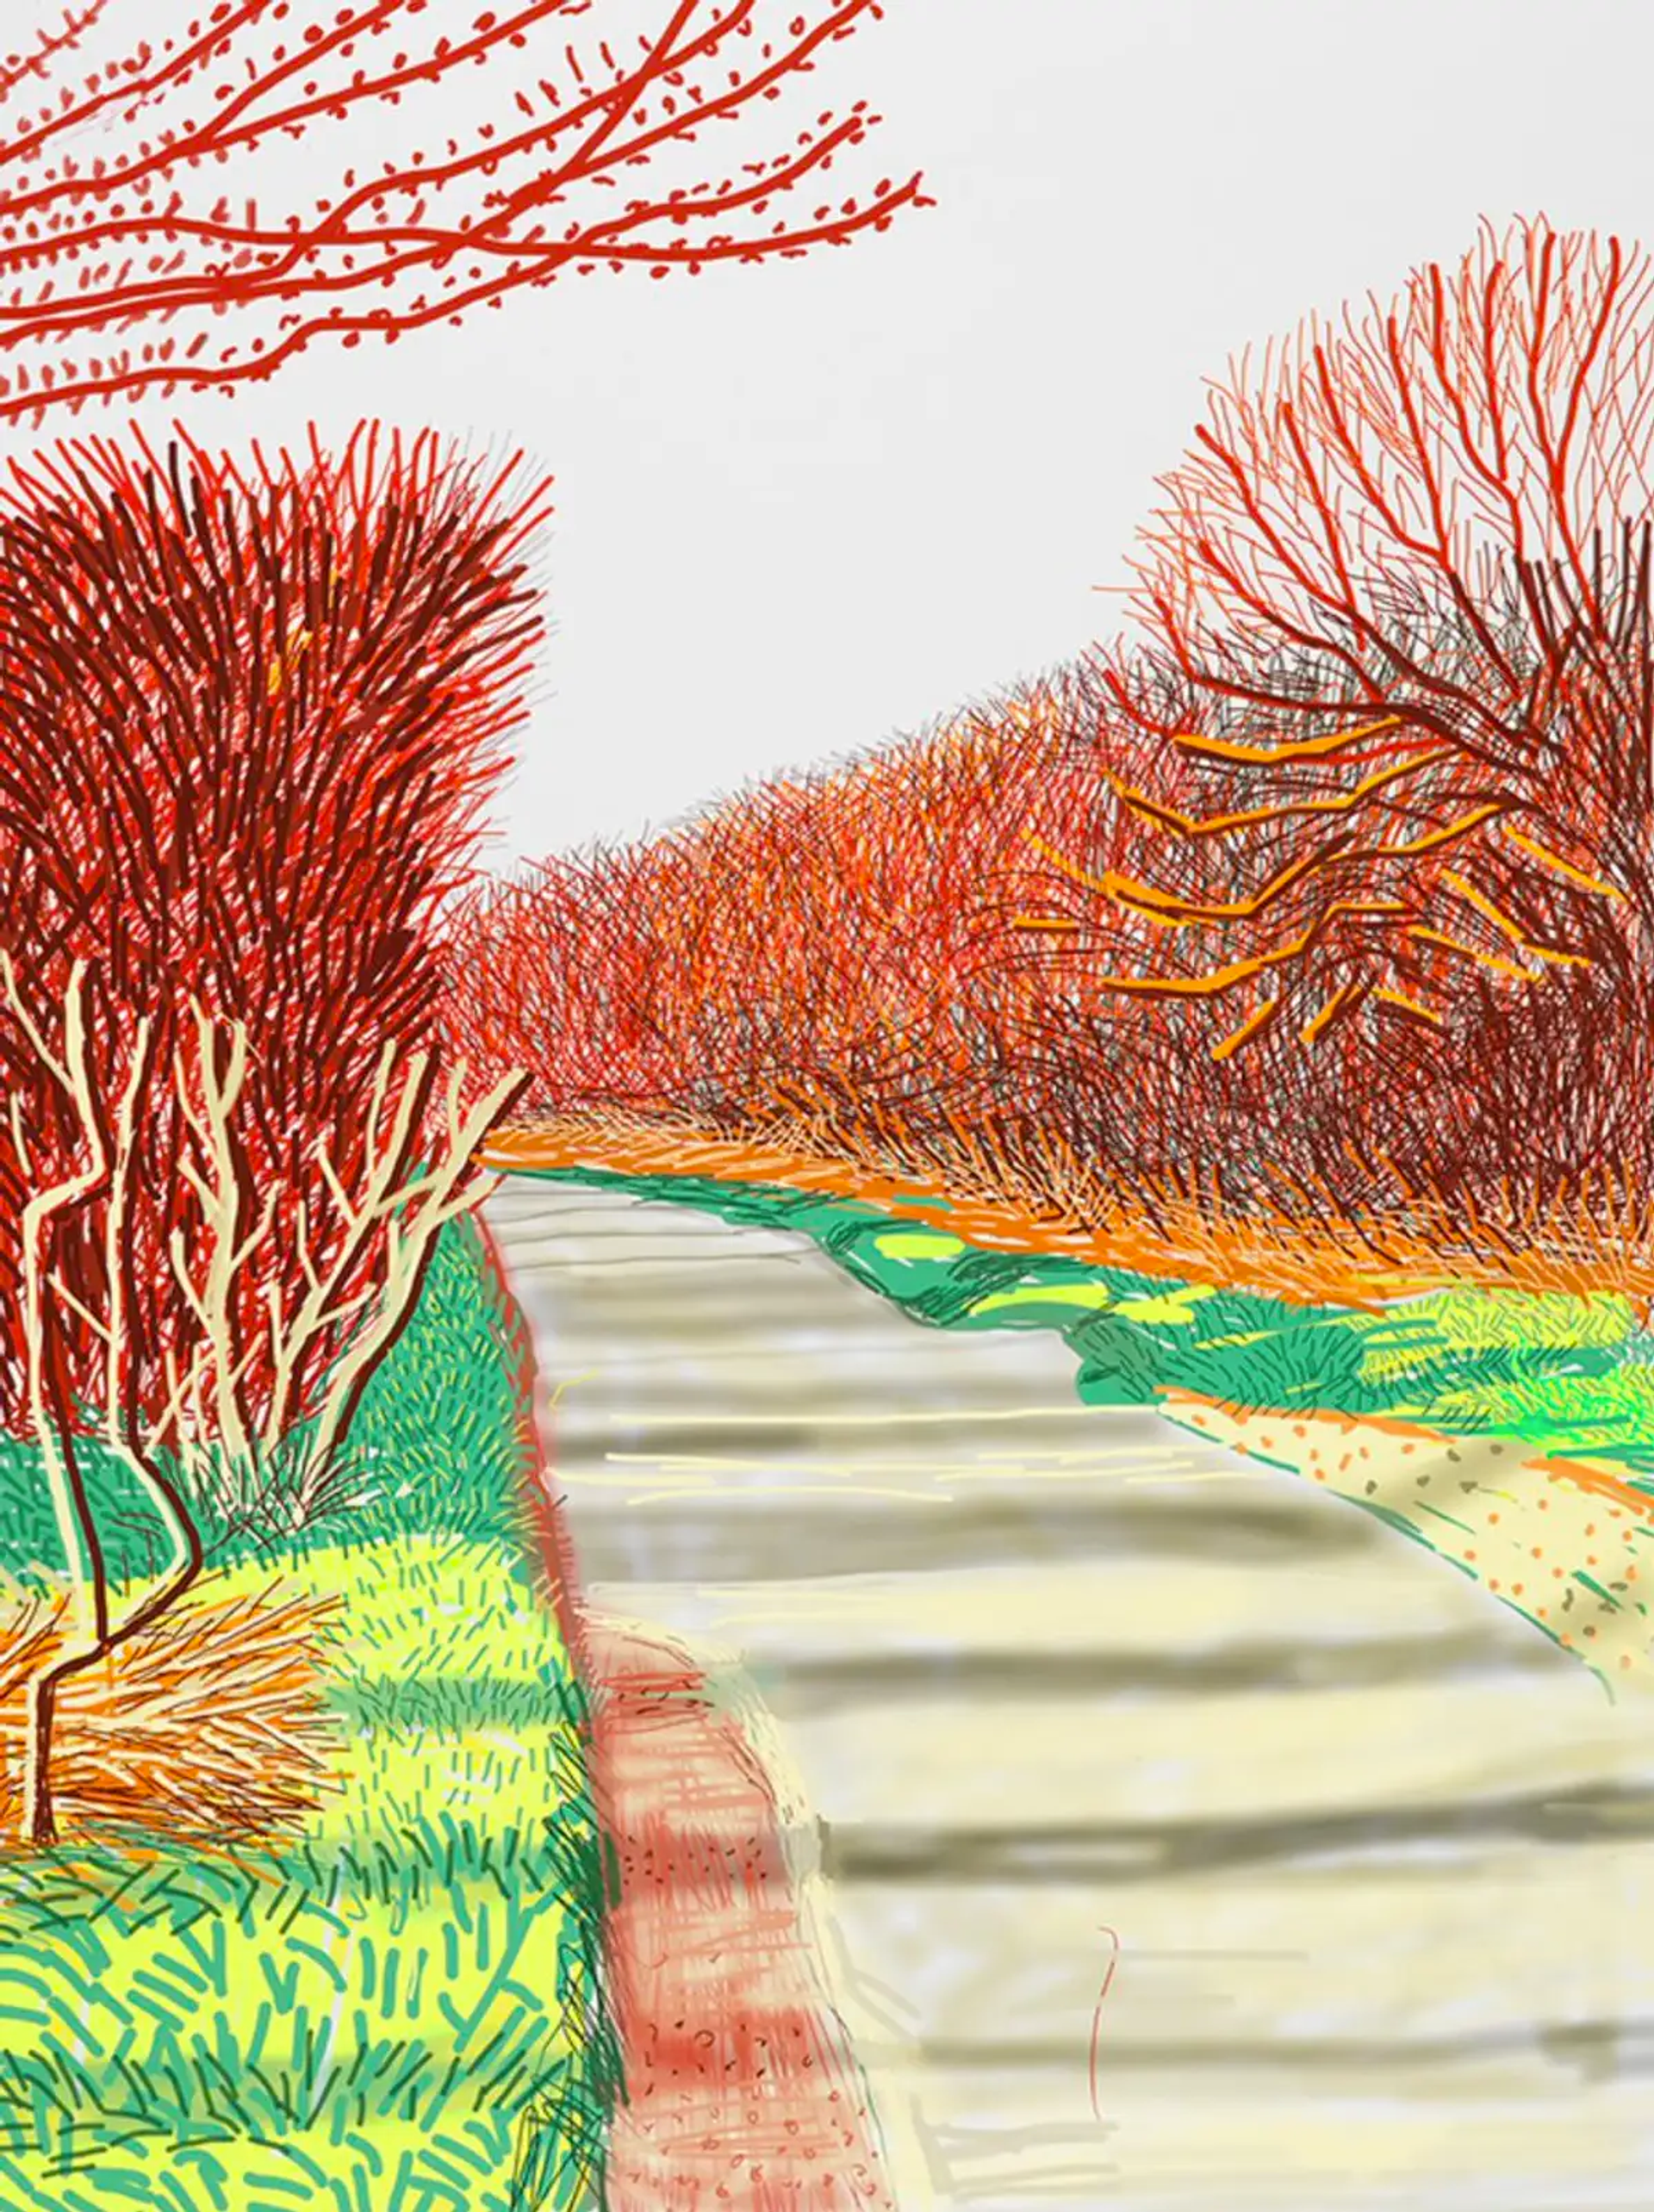 A digital drawing by David Hockney, showing a leafless wooded path in tones of orange.